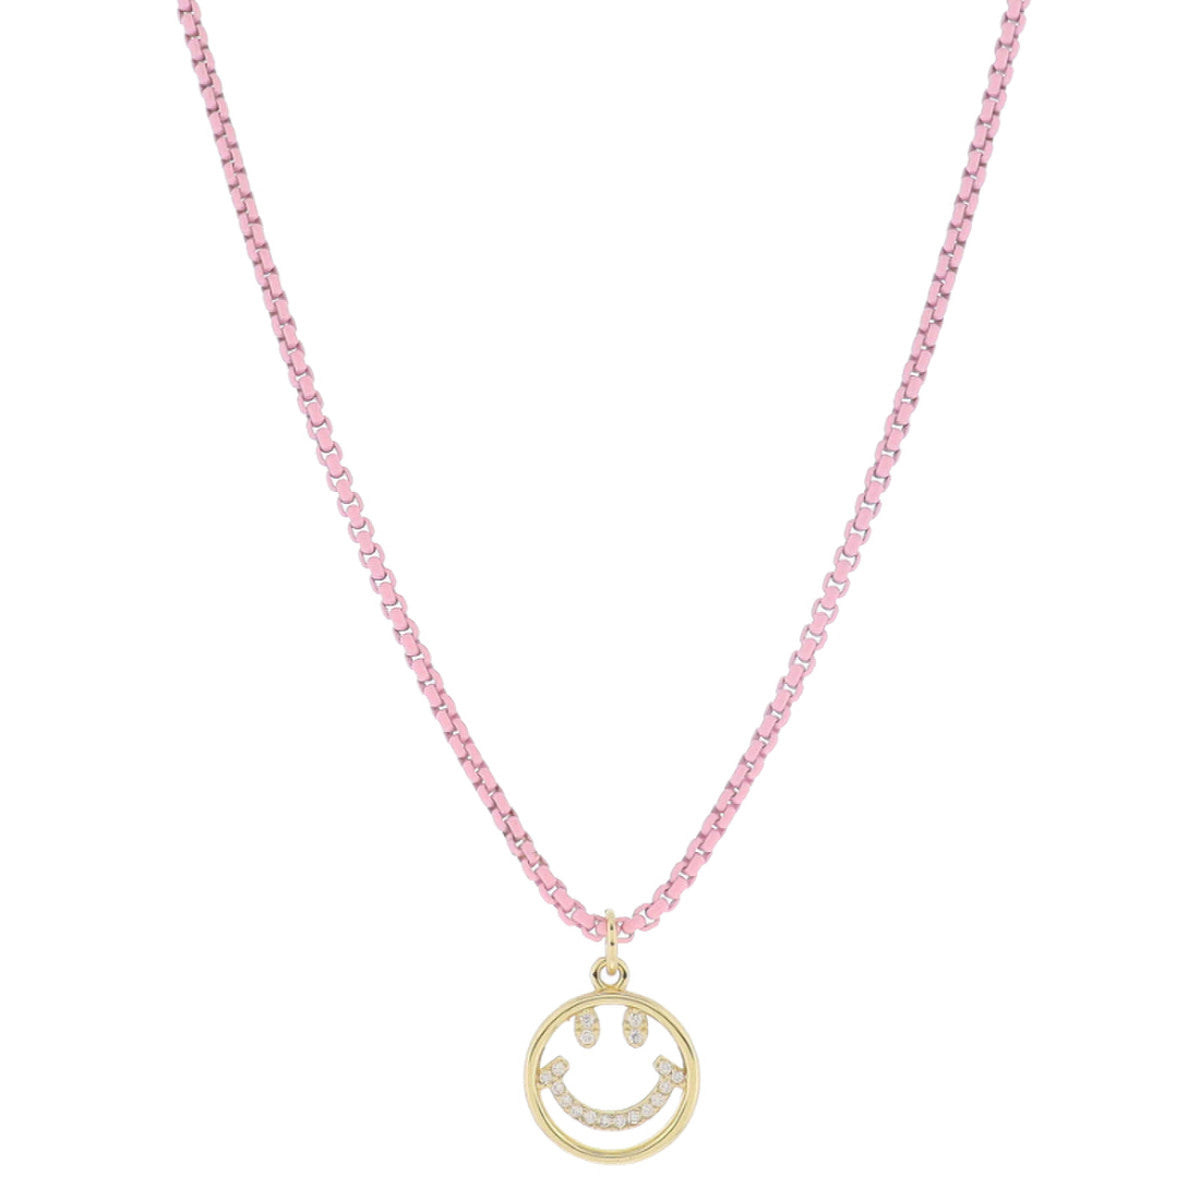 Kids Happy Face Necklace - Light Pink with Crystals